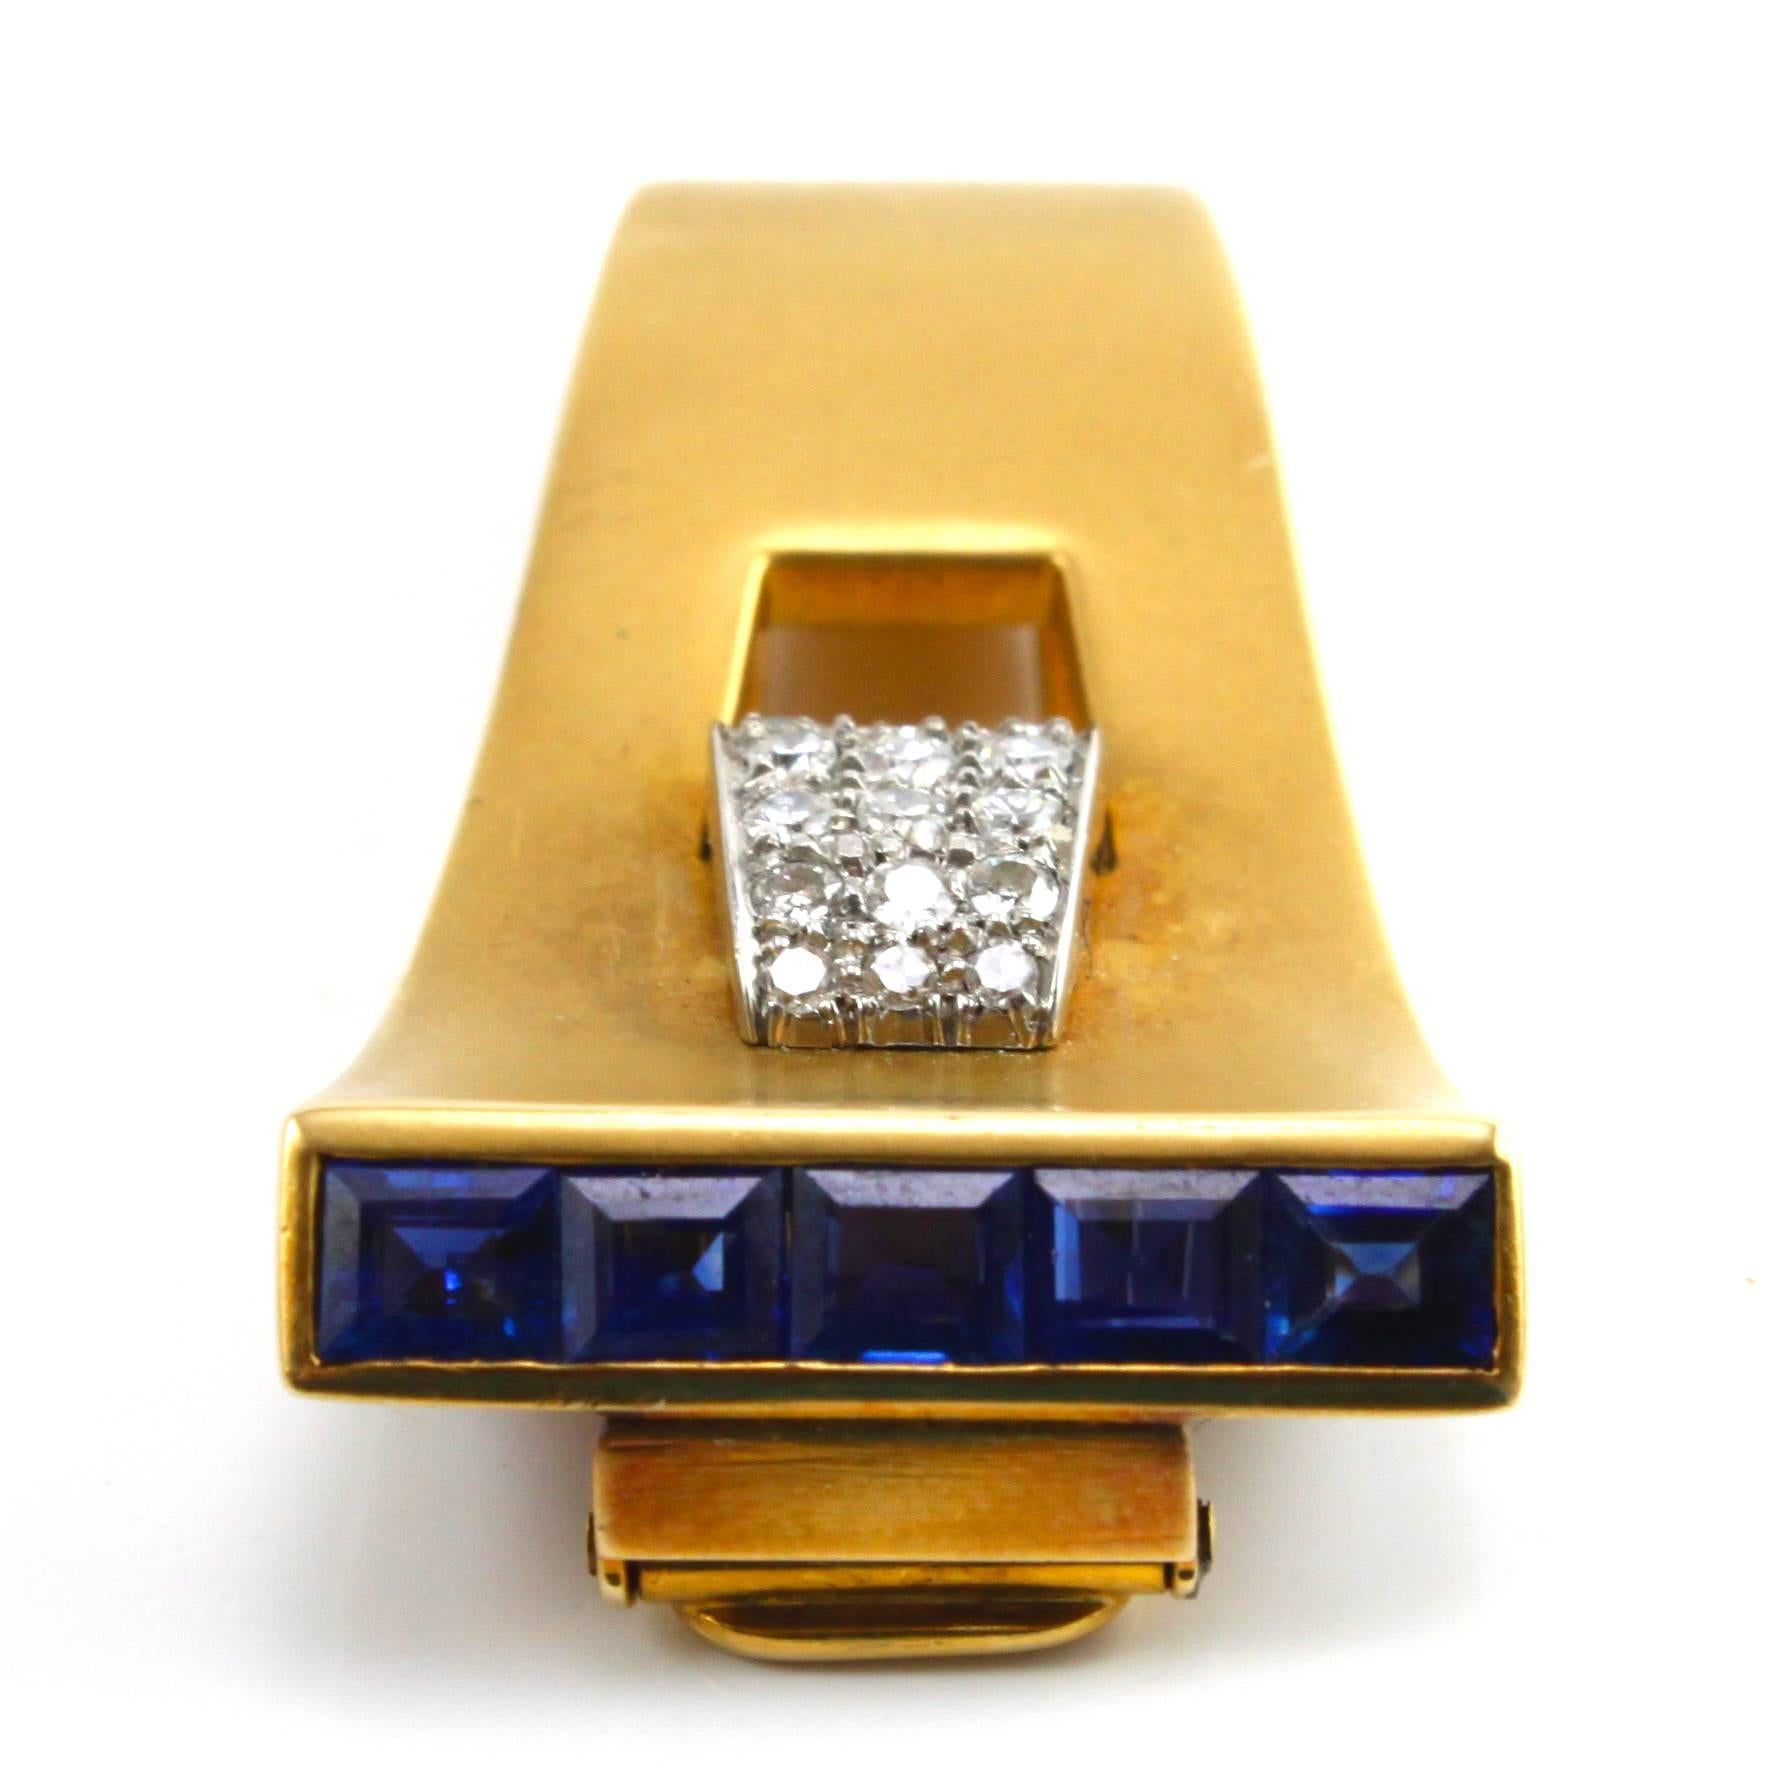 A very sleek and elegant Sapphire and Diamond Clip Brooch made in the 1940s, depicting the typical Retro design.

The diamonds weigh circa 1 carats and the sapphires weigh circa 1.5 carats. Both are of excellent quality.
